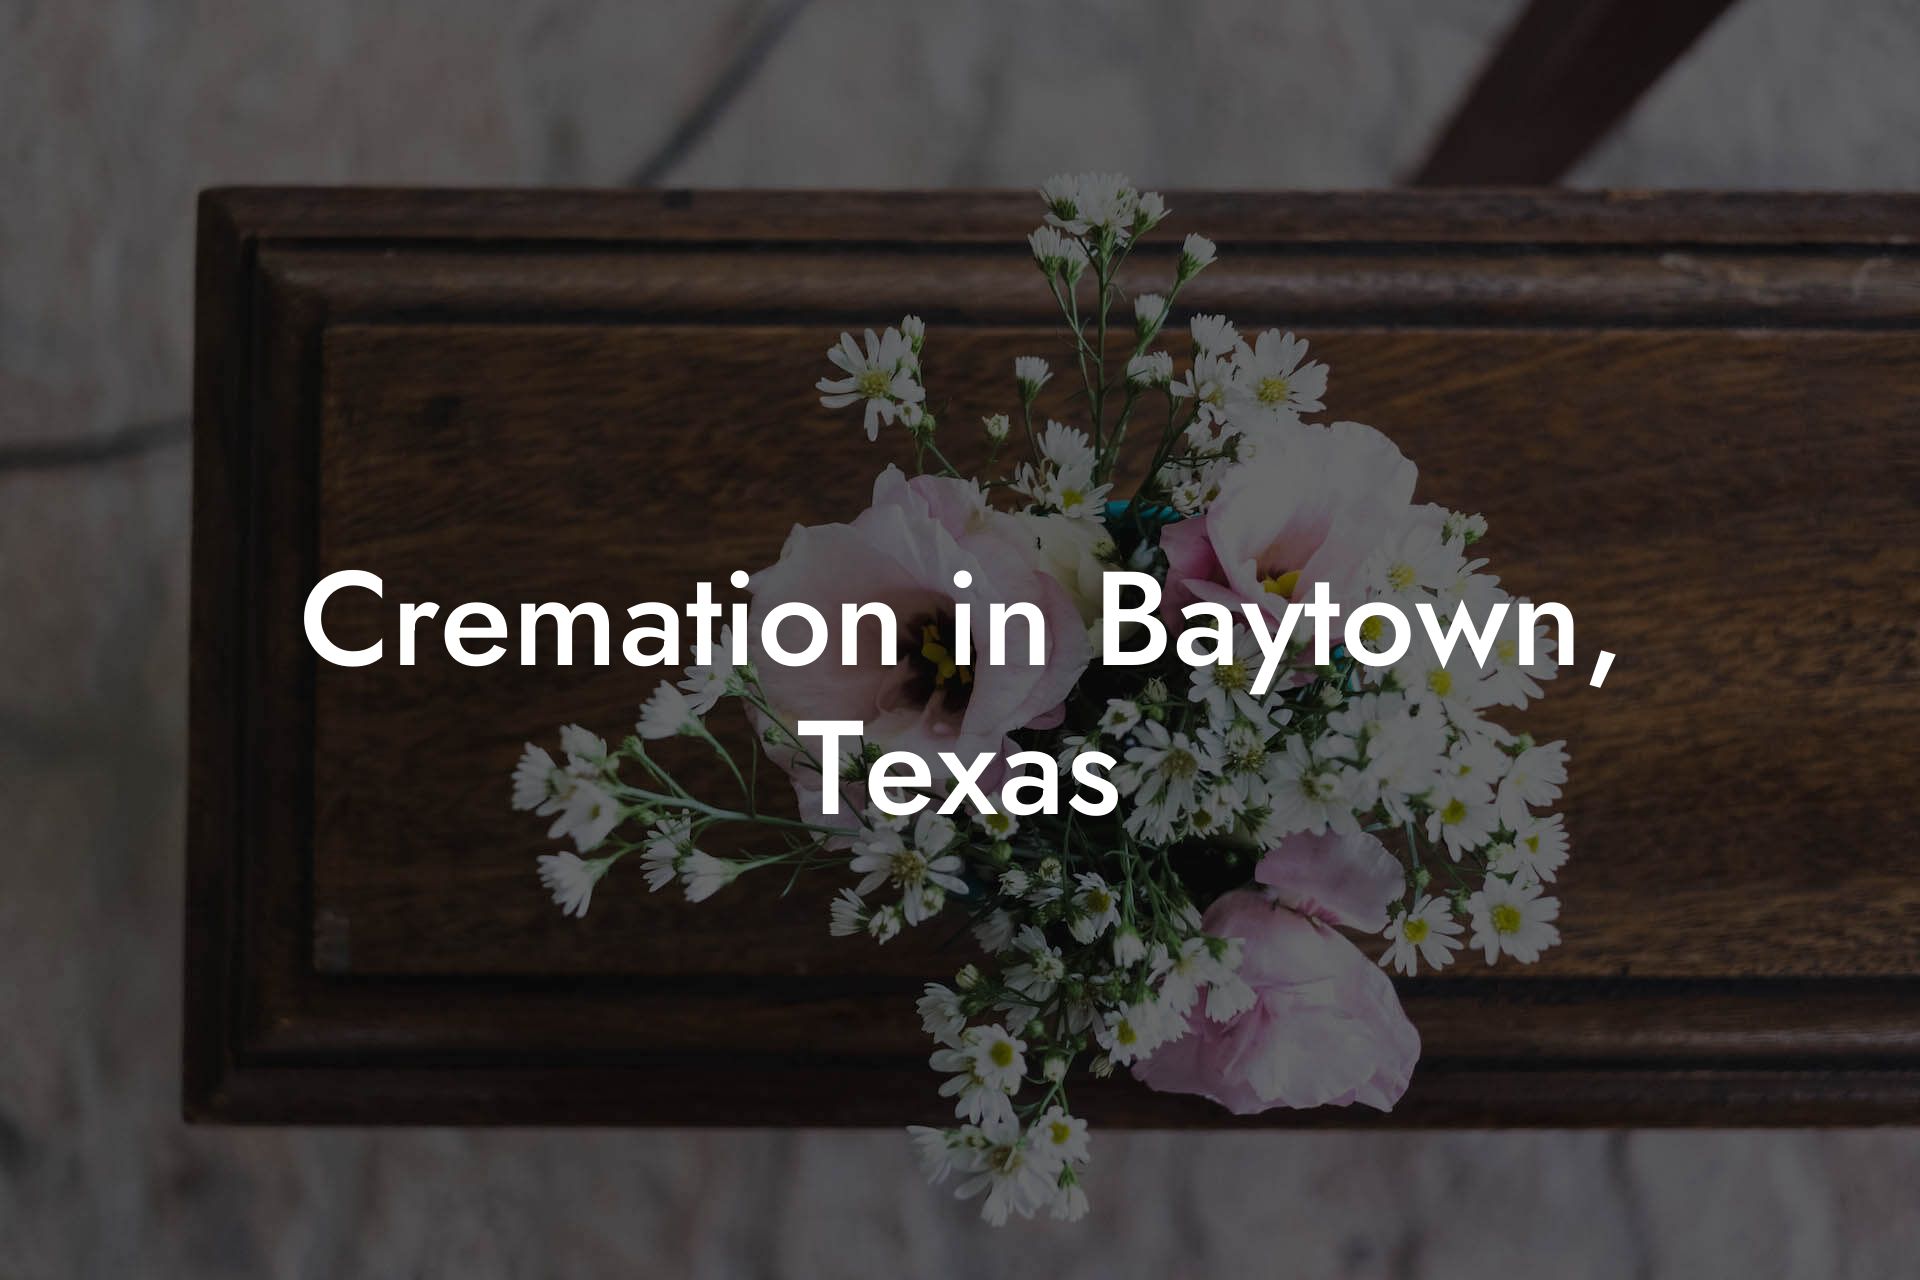 Cremation in Baytown, Texas